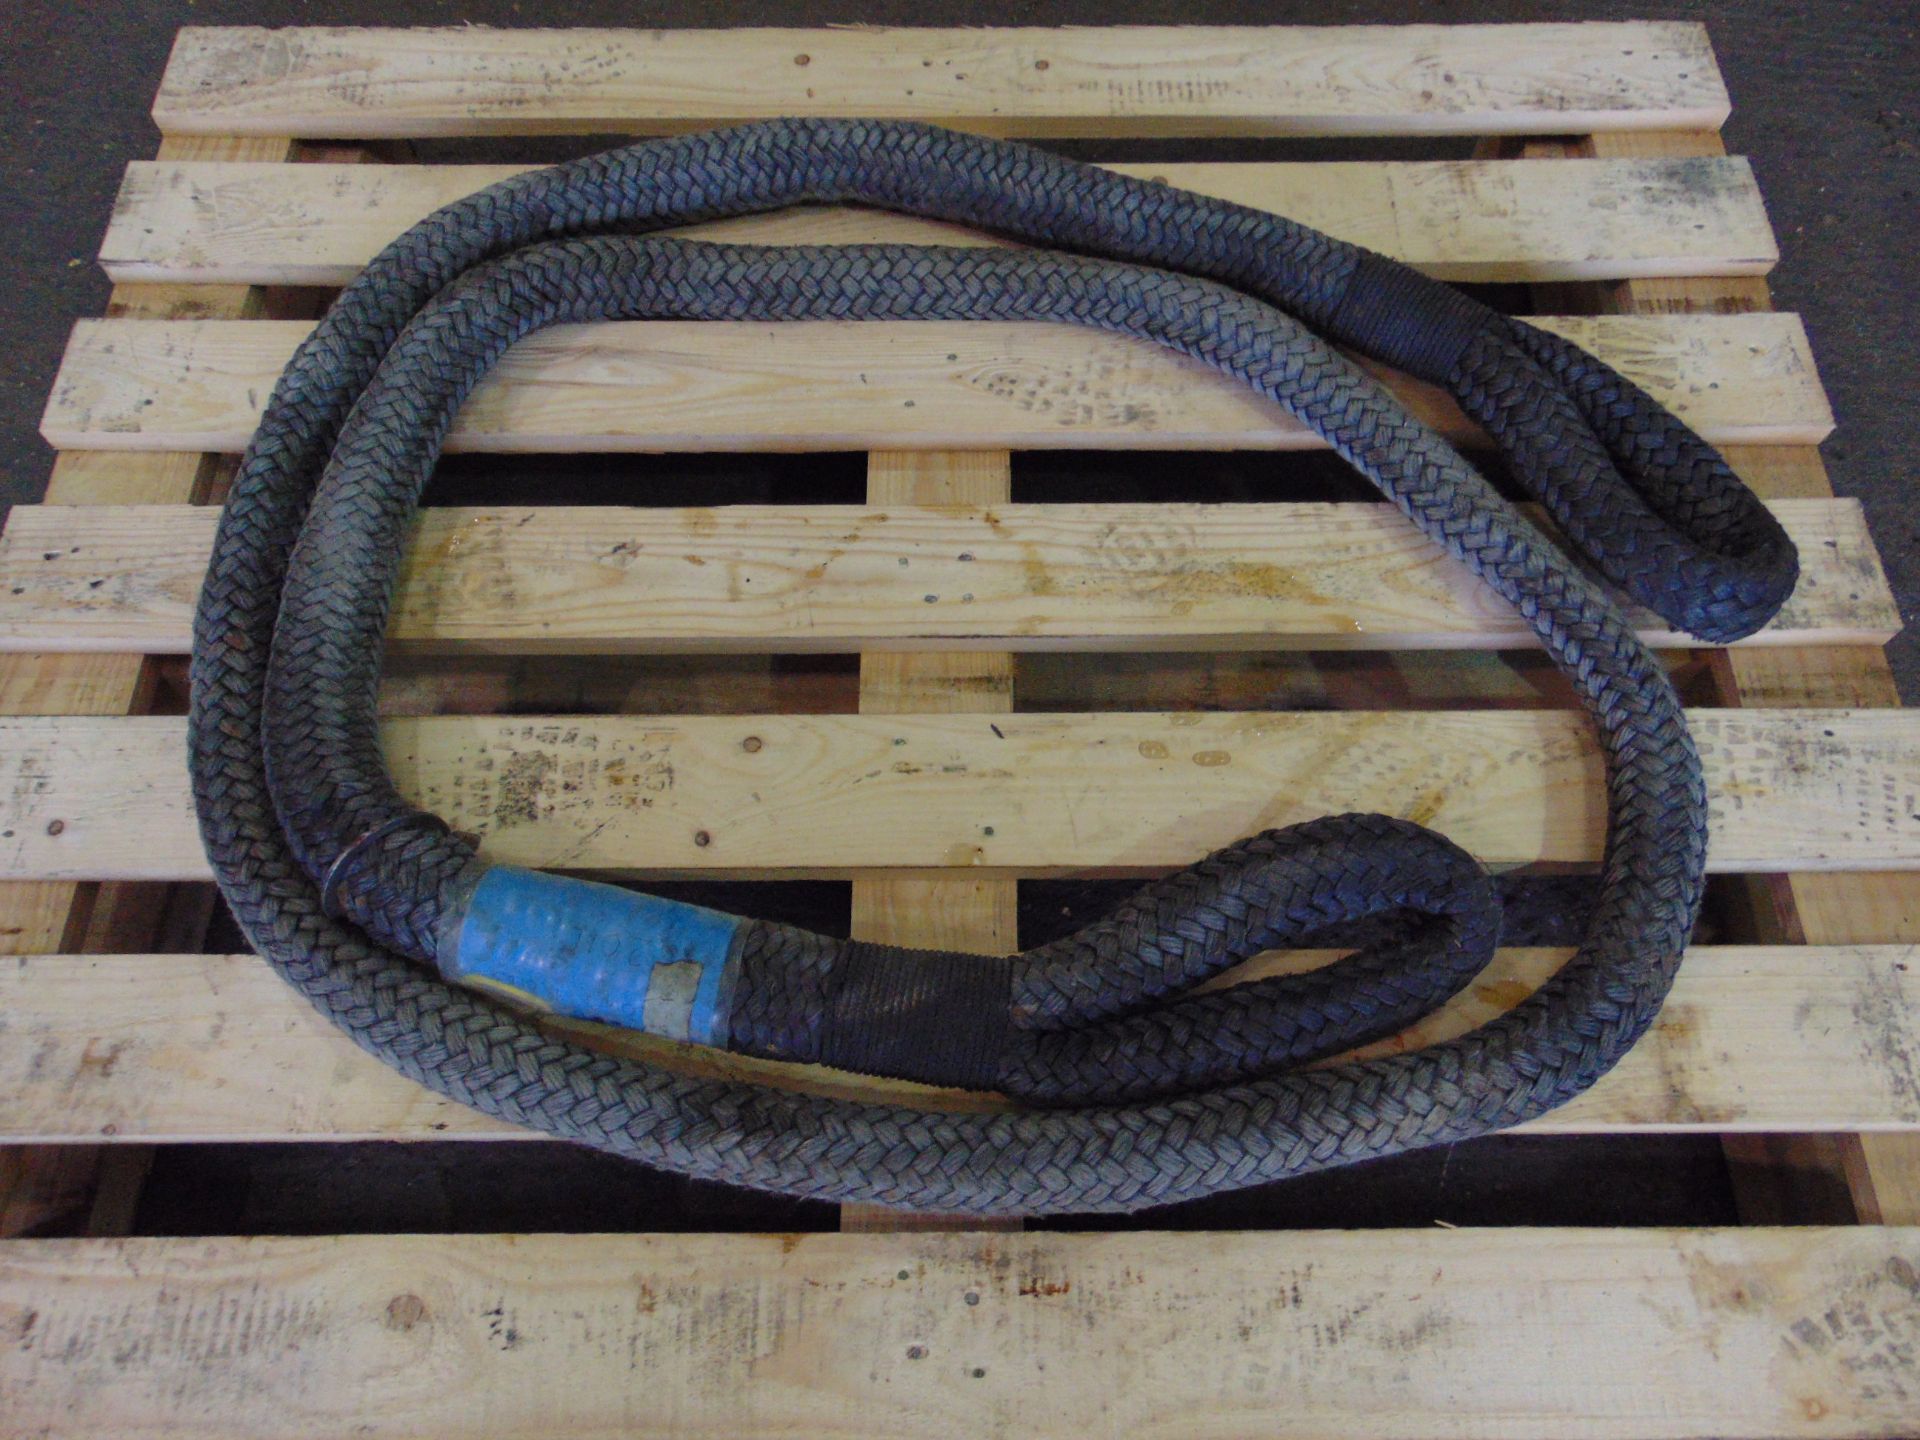 4.5m Marlow 20t Kinetic Energy Recovery Rope